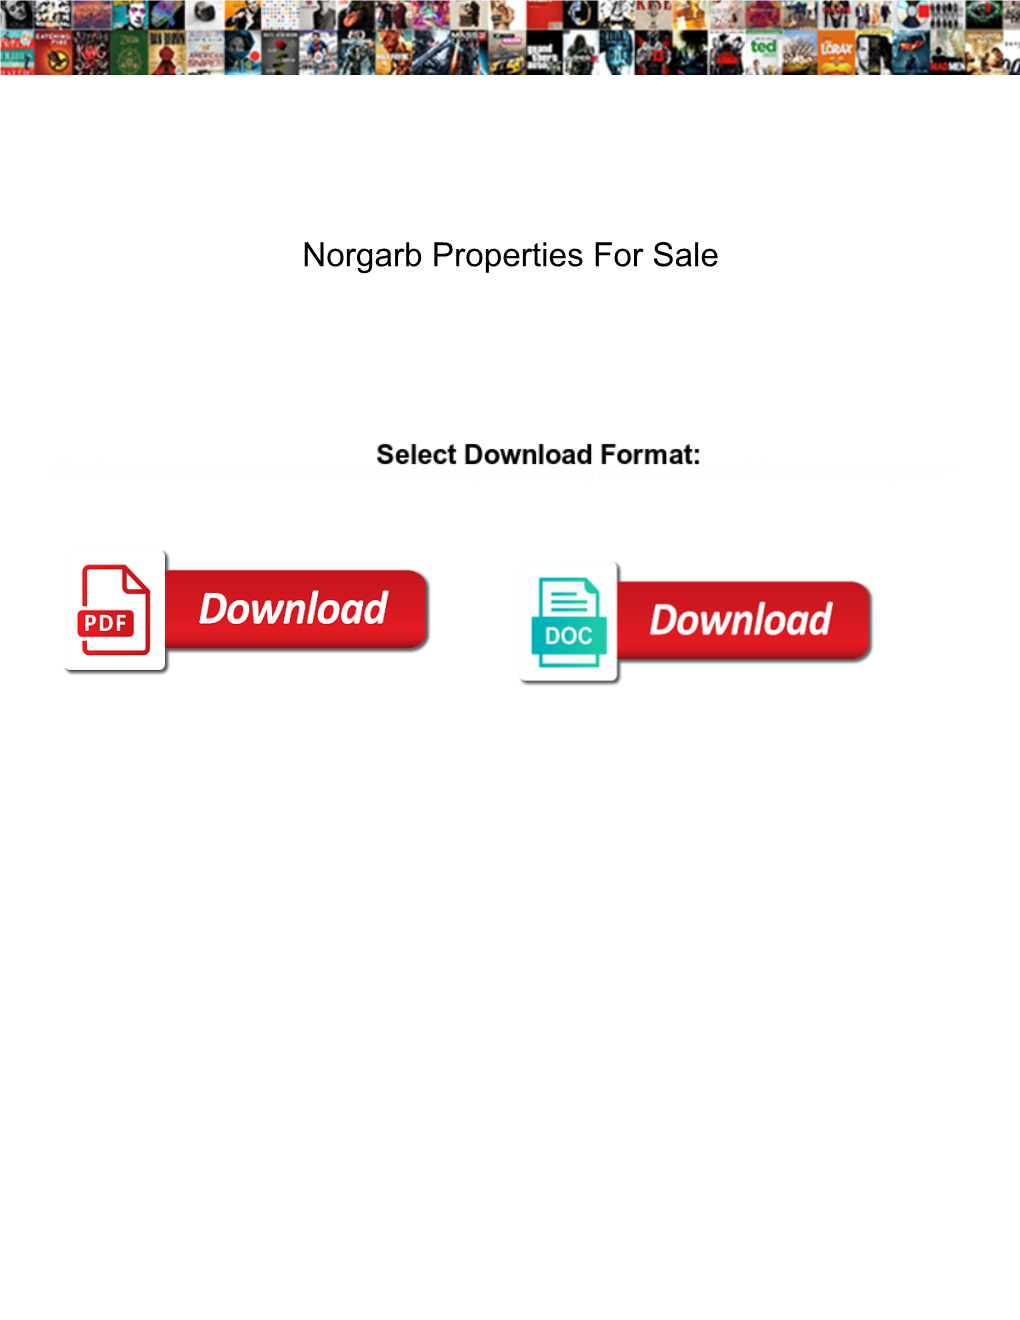 Norgarb Properties for Sale